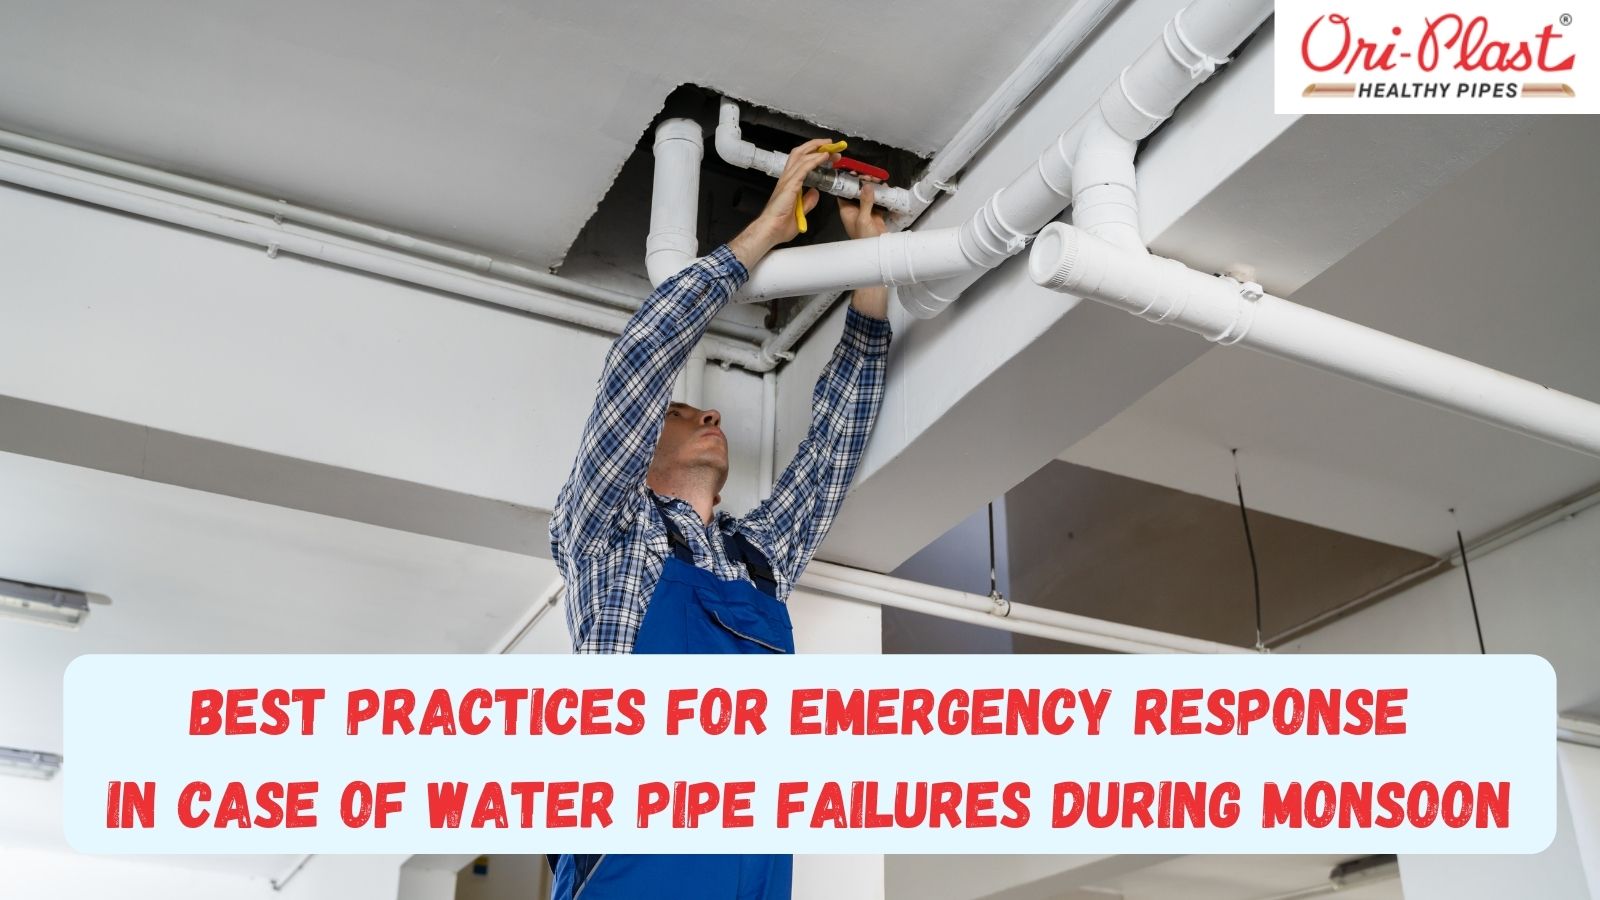 Best practices for emergency response in case of water pipe failures during monsoon